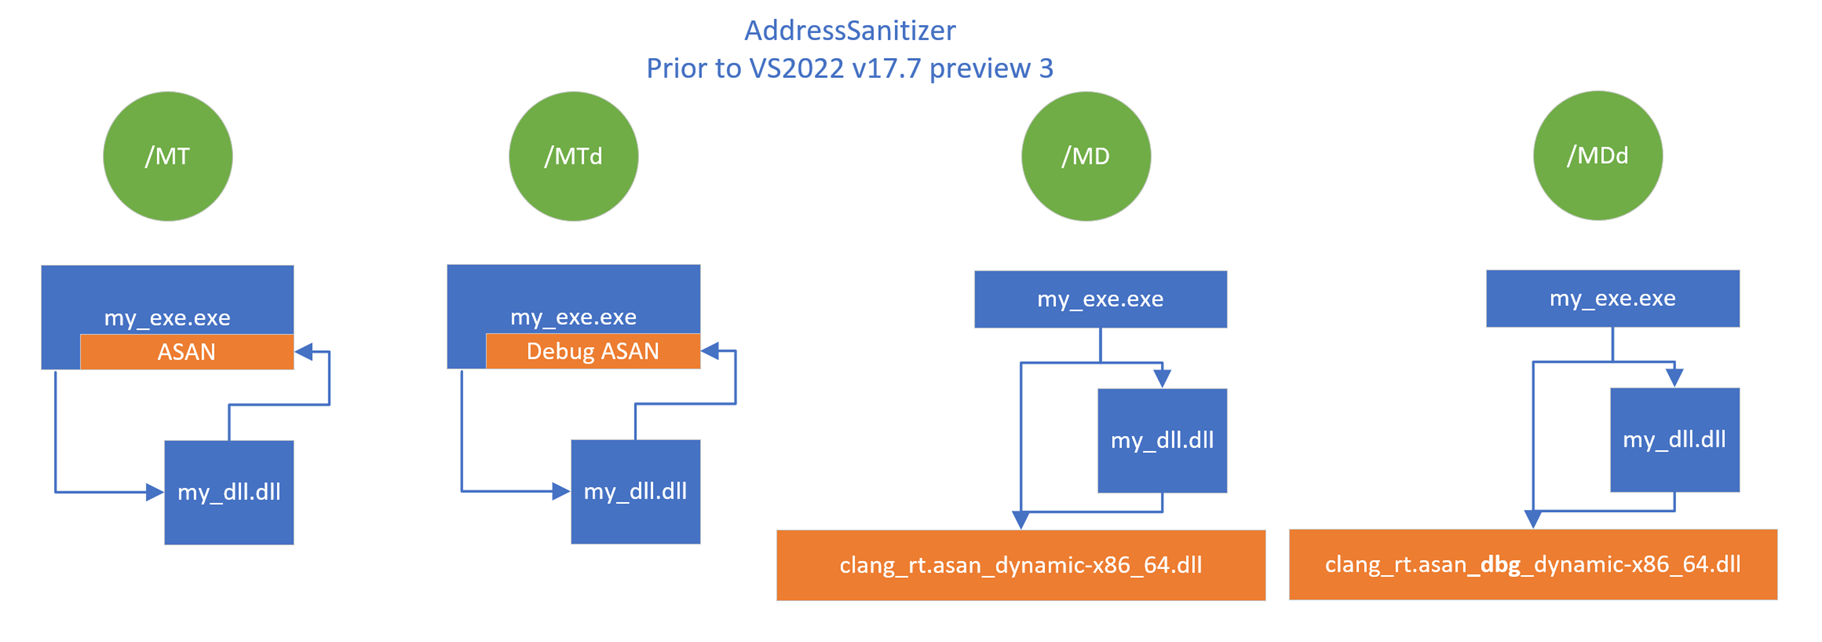 Diagram of how the ASan runtime dll was linked prior to Visual Studio 2022 Preview 3.